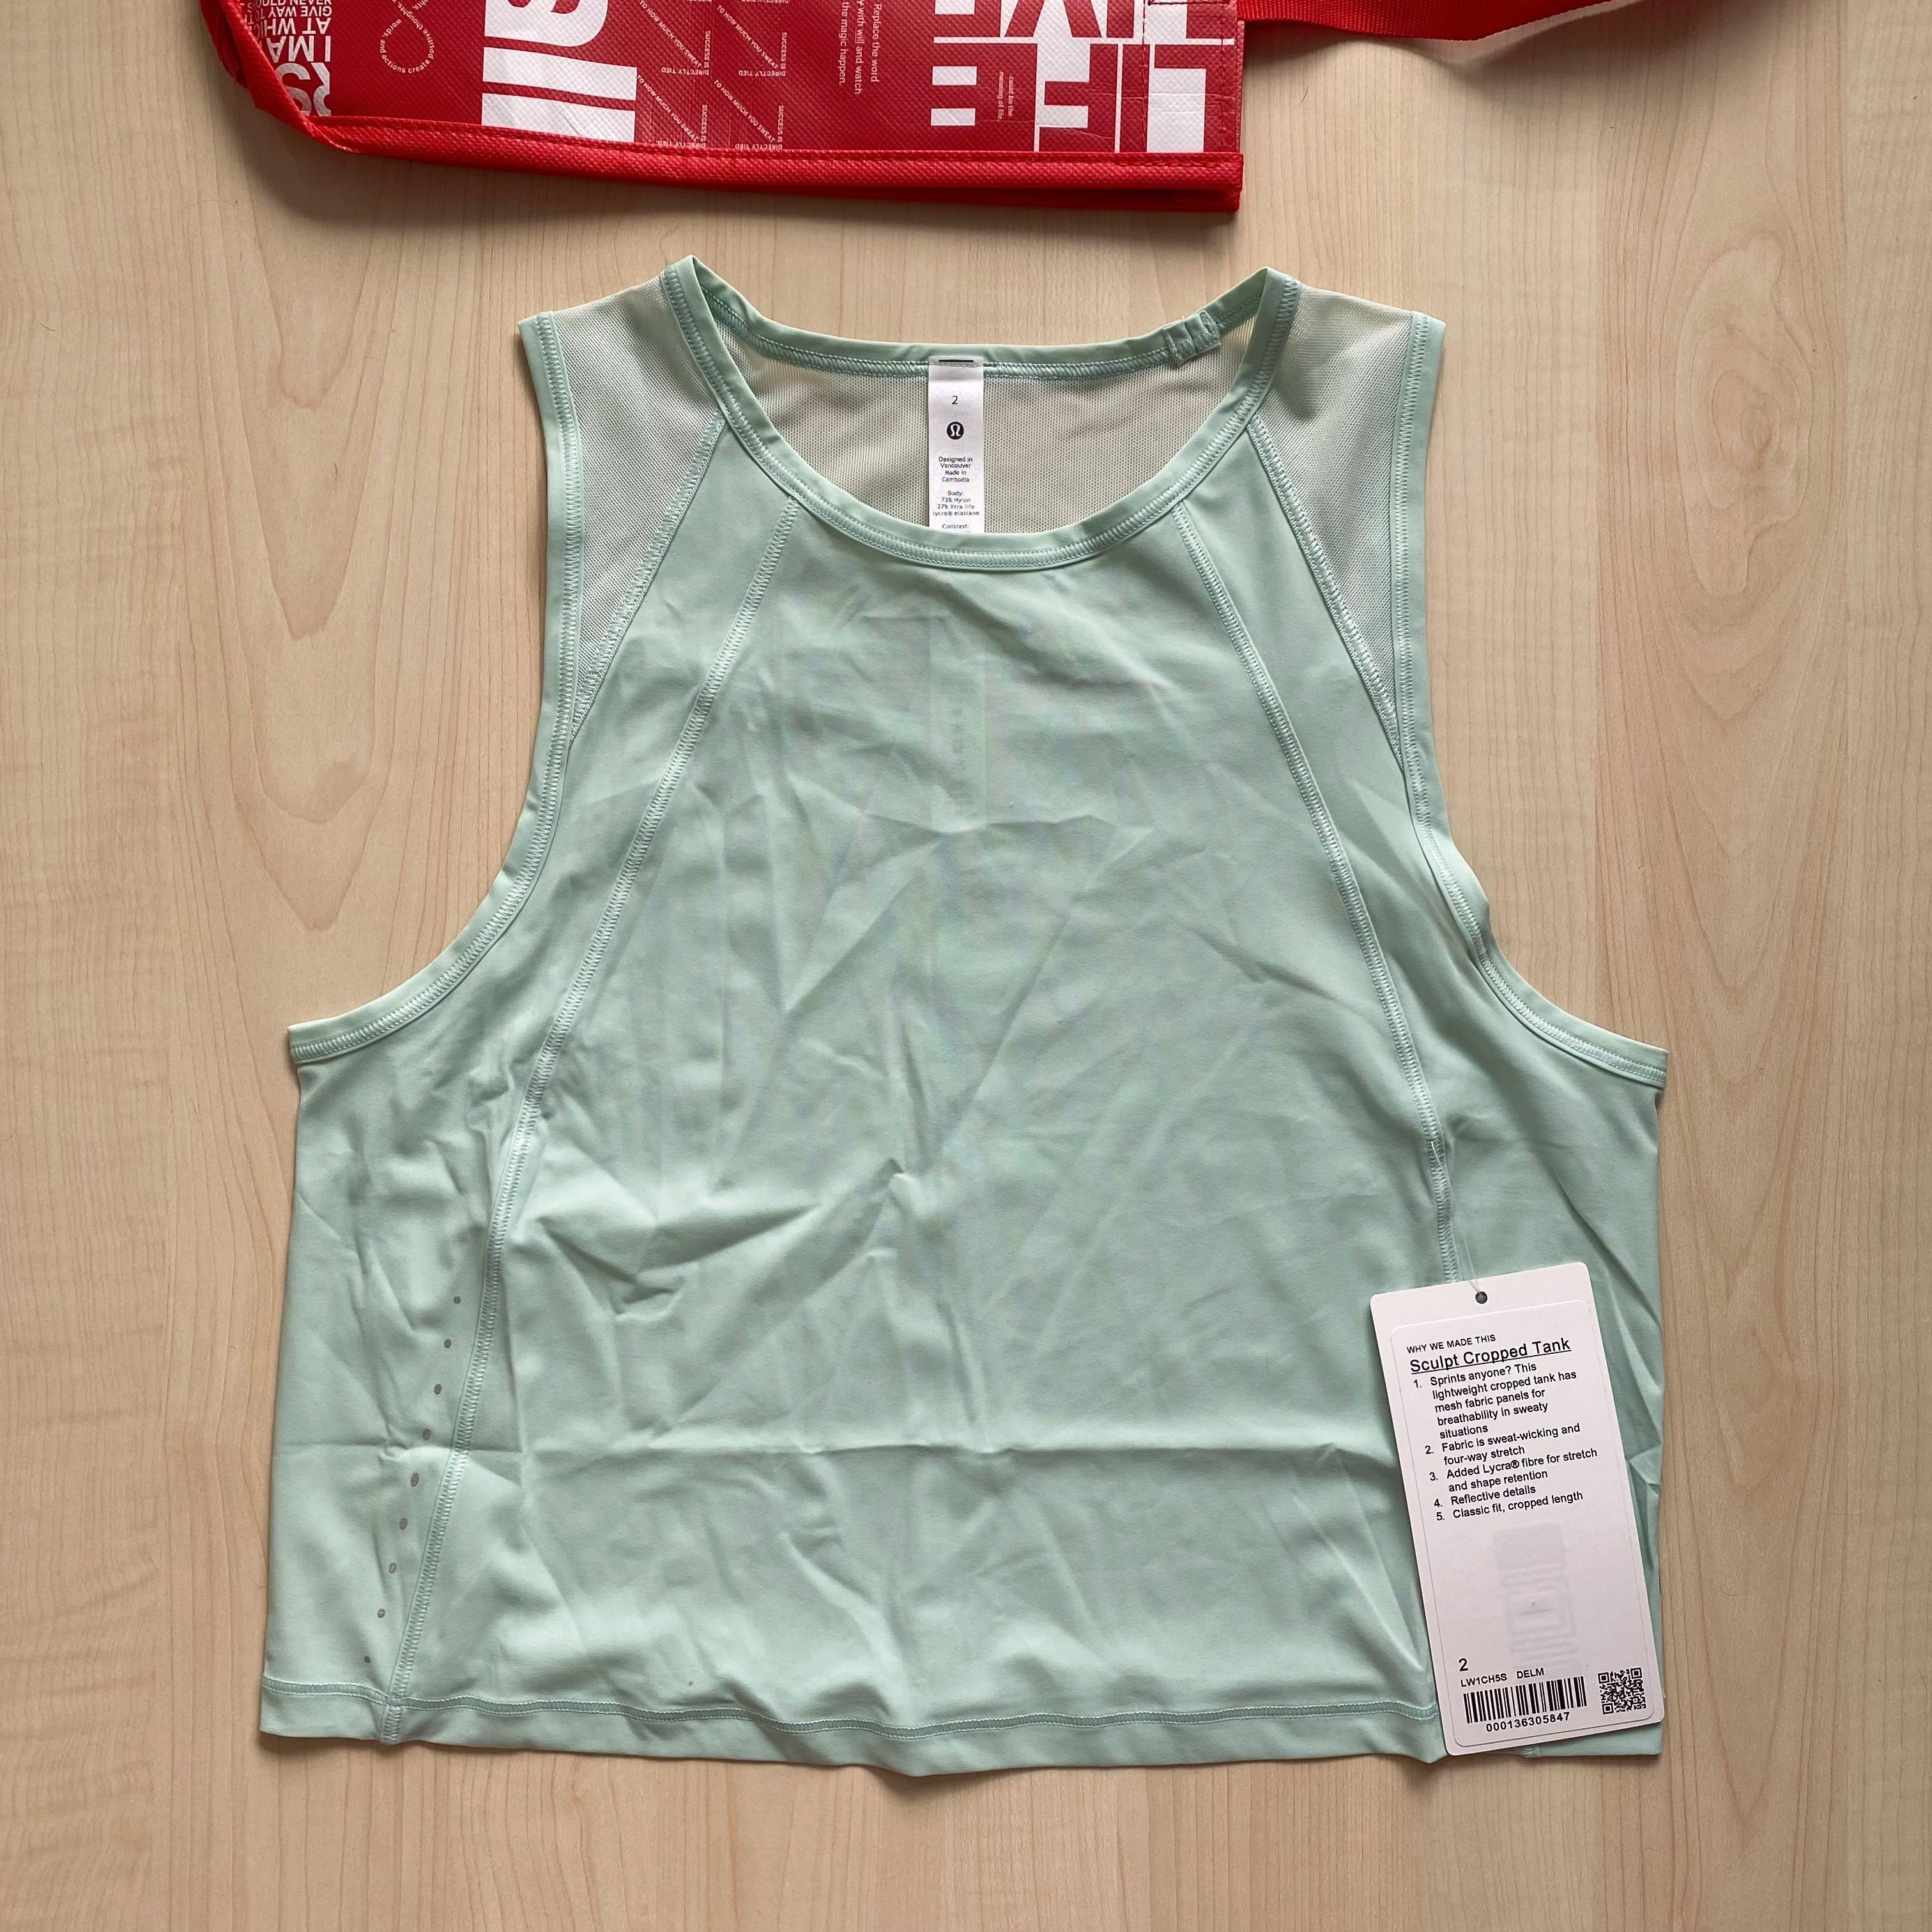 Lululemon NWT Sculpt Tank Cropped - Symphony Blue, Women's Fashion,  Activewear on Carousell